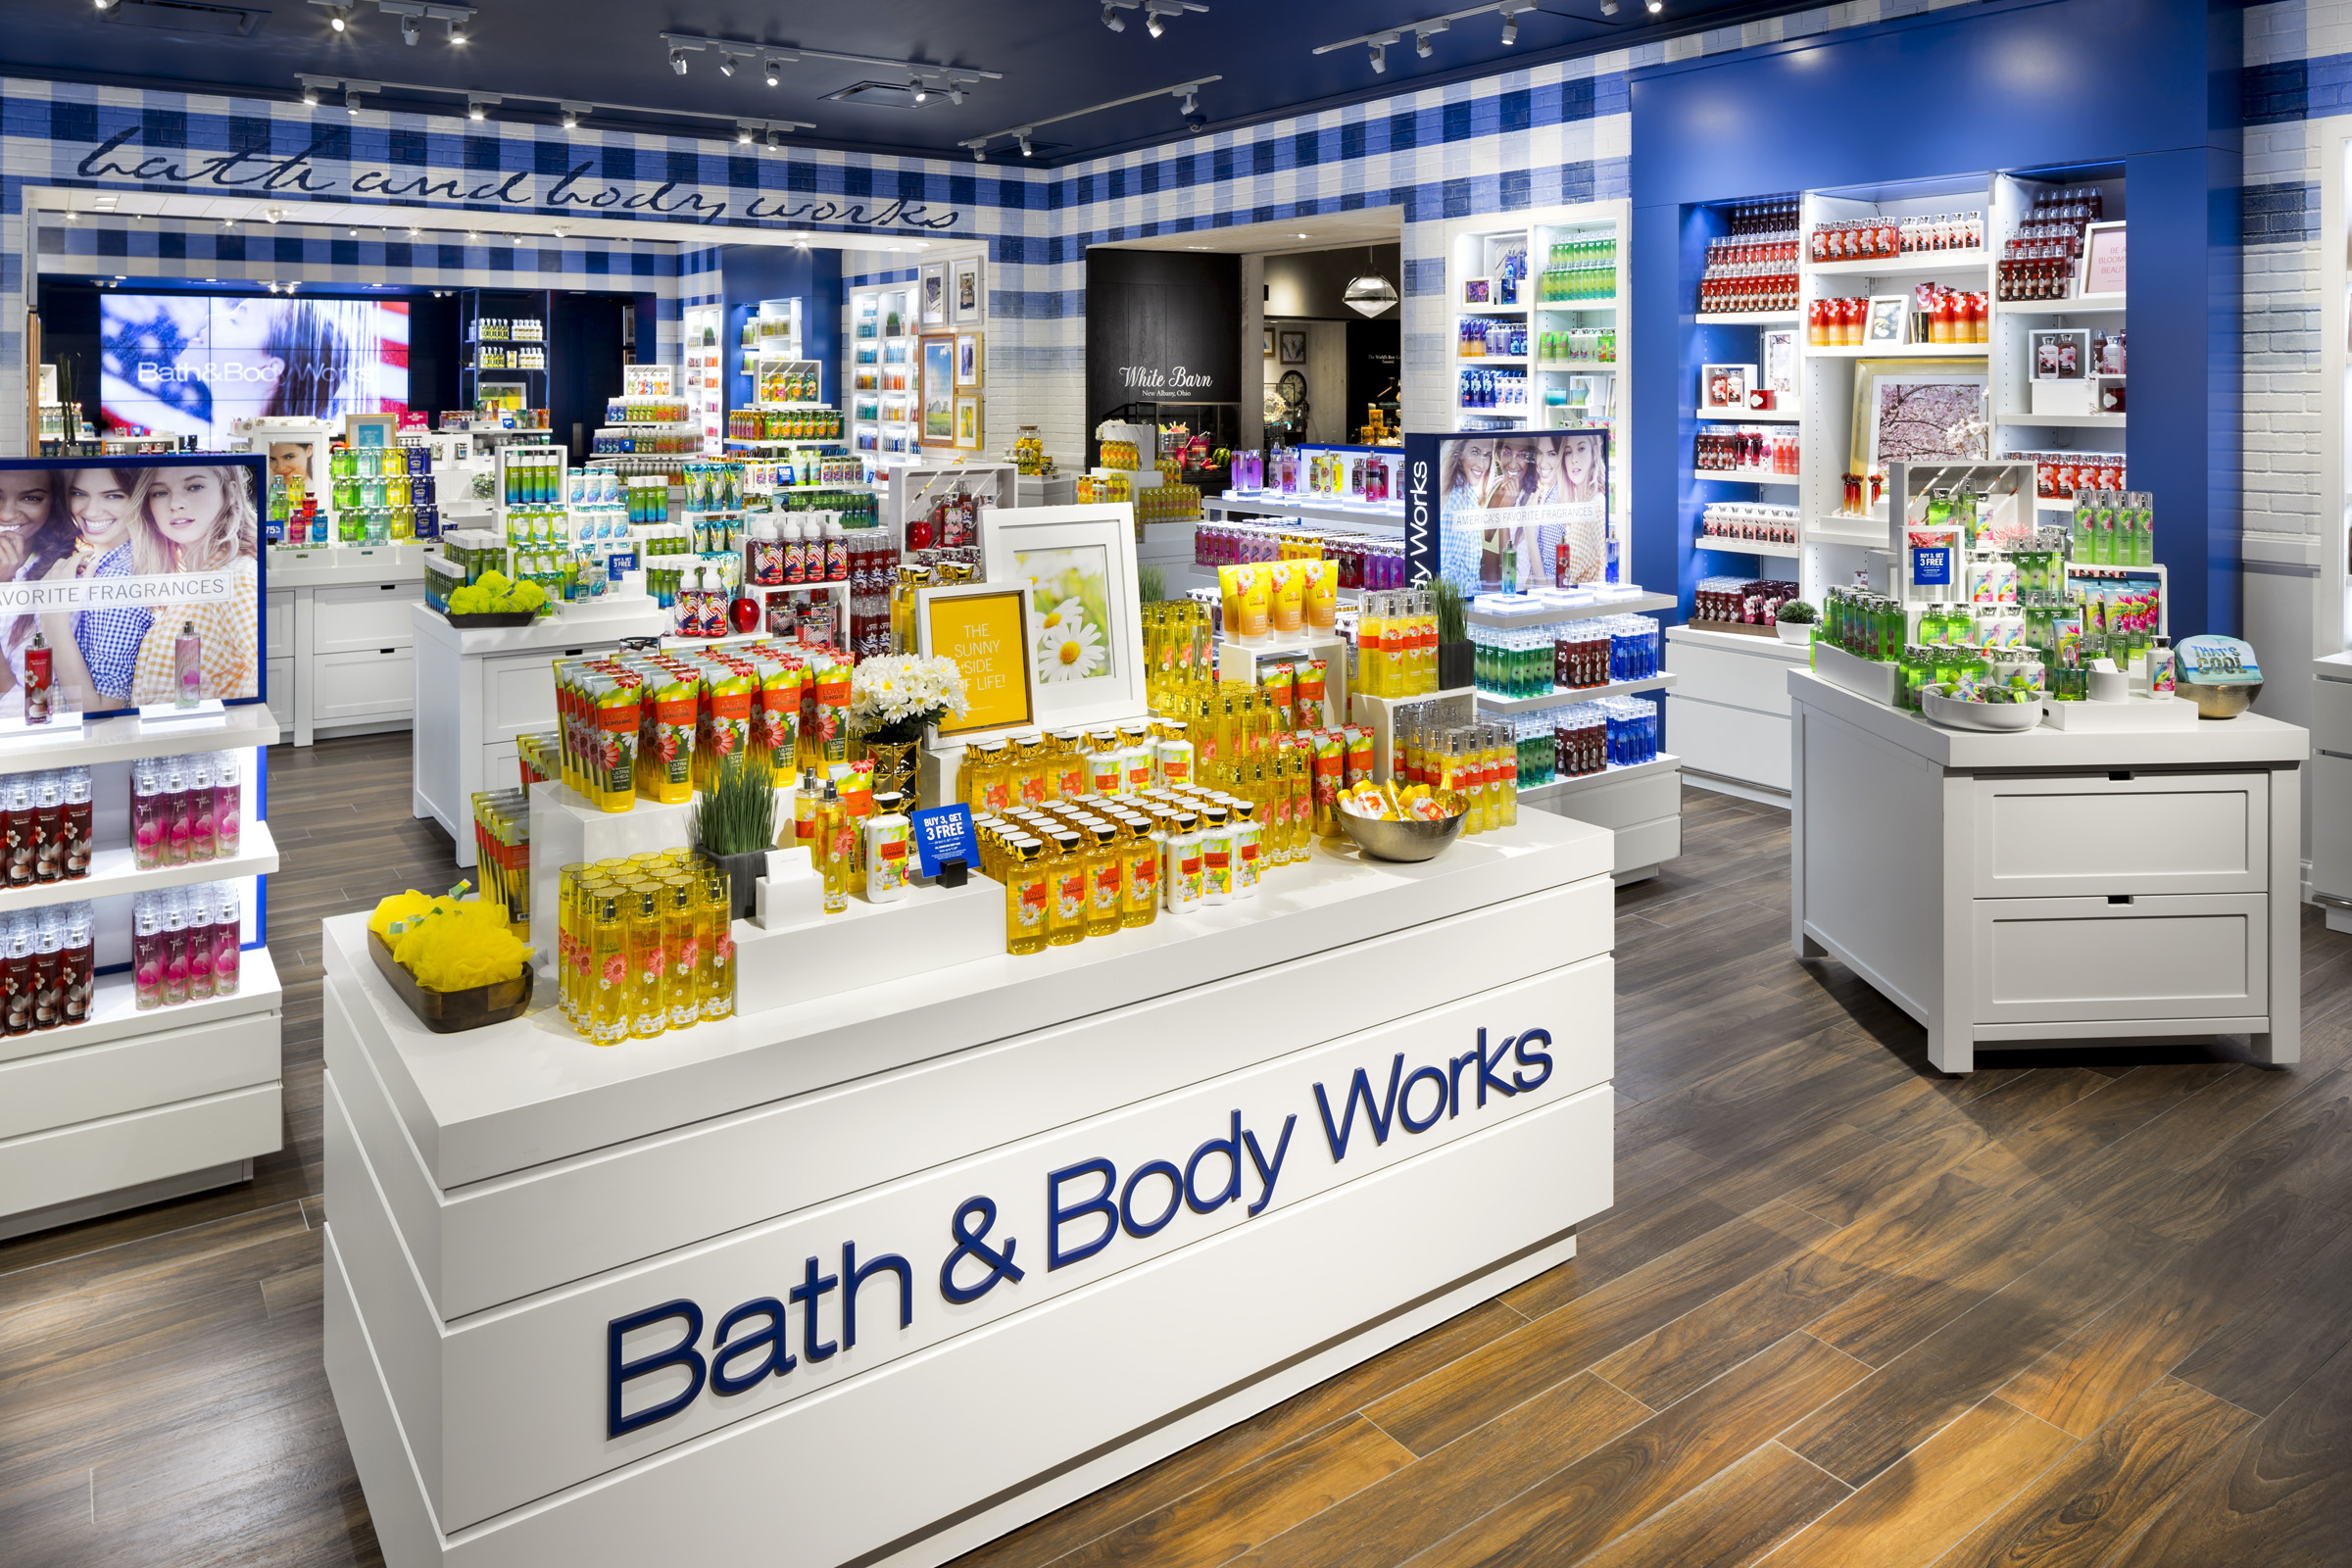 After a Victoria's Secret split, Bath & Body Works begins to forge its own  path